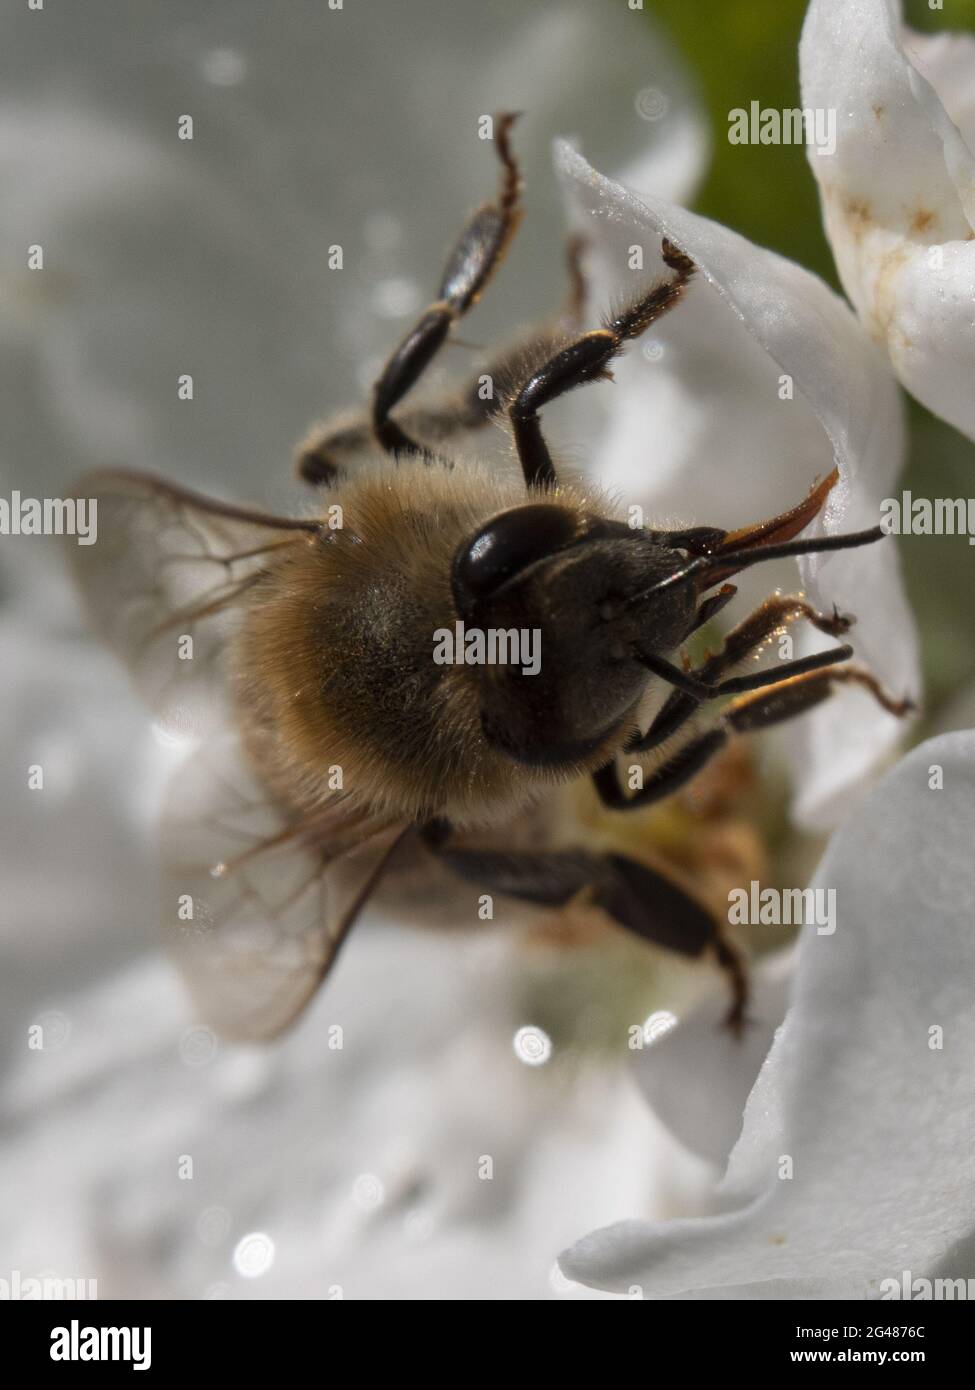 Bee on a flower of the white cherry blossoms. Makro close up Stock Photo